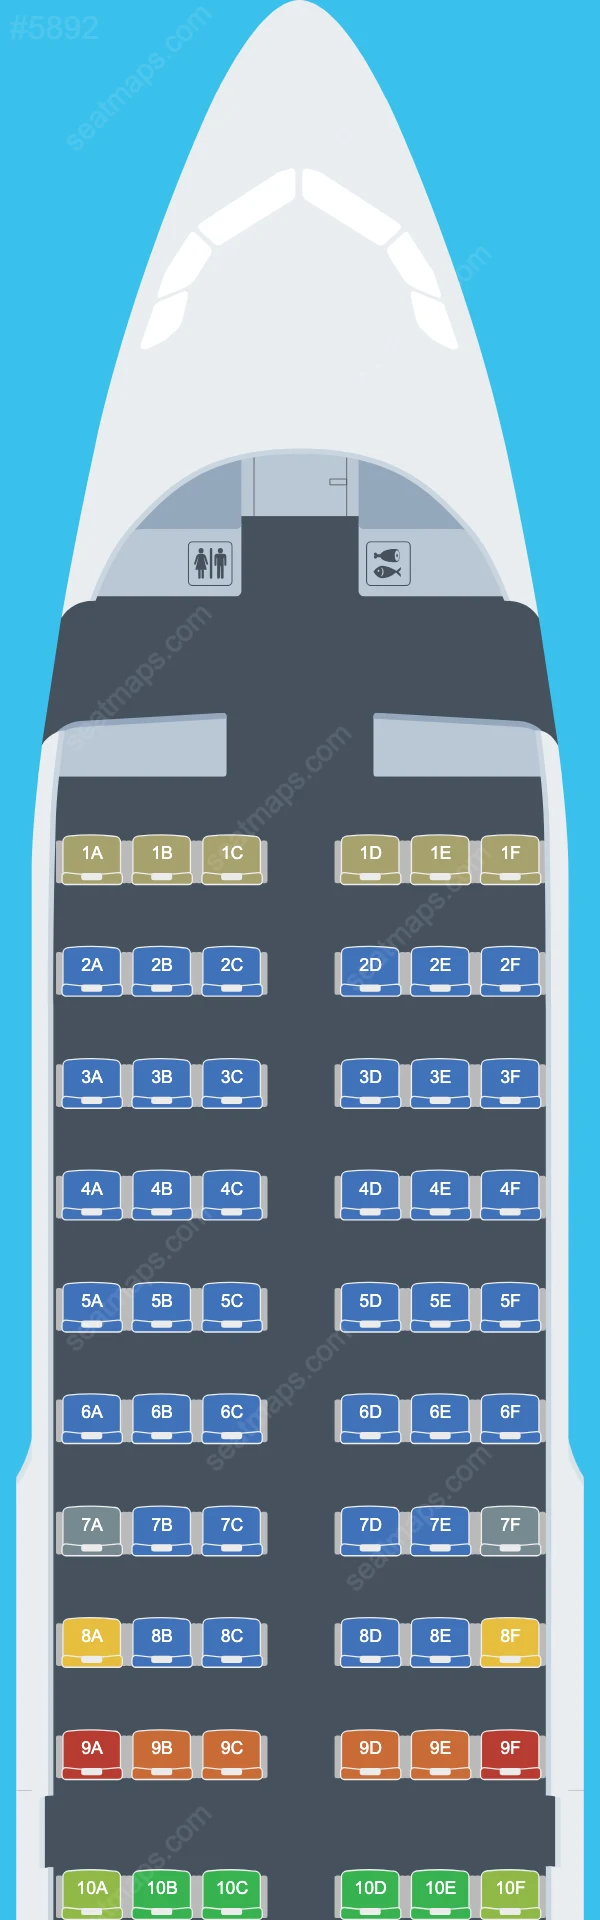 LATAM Airlines Colombia Airbus A319 Seat Maps A319-100 V.1